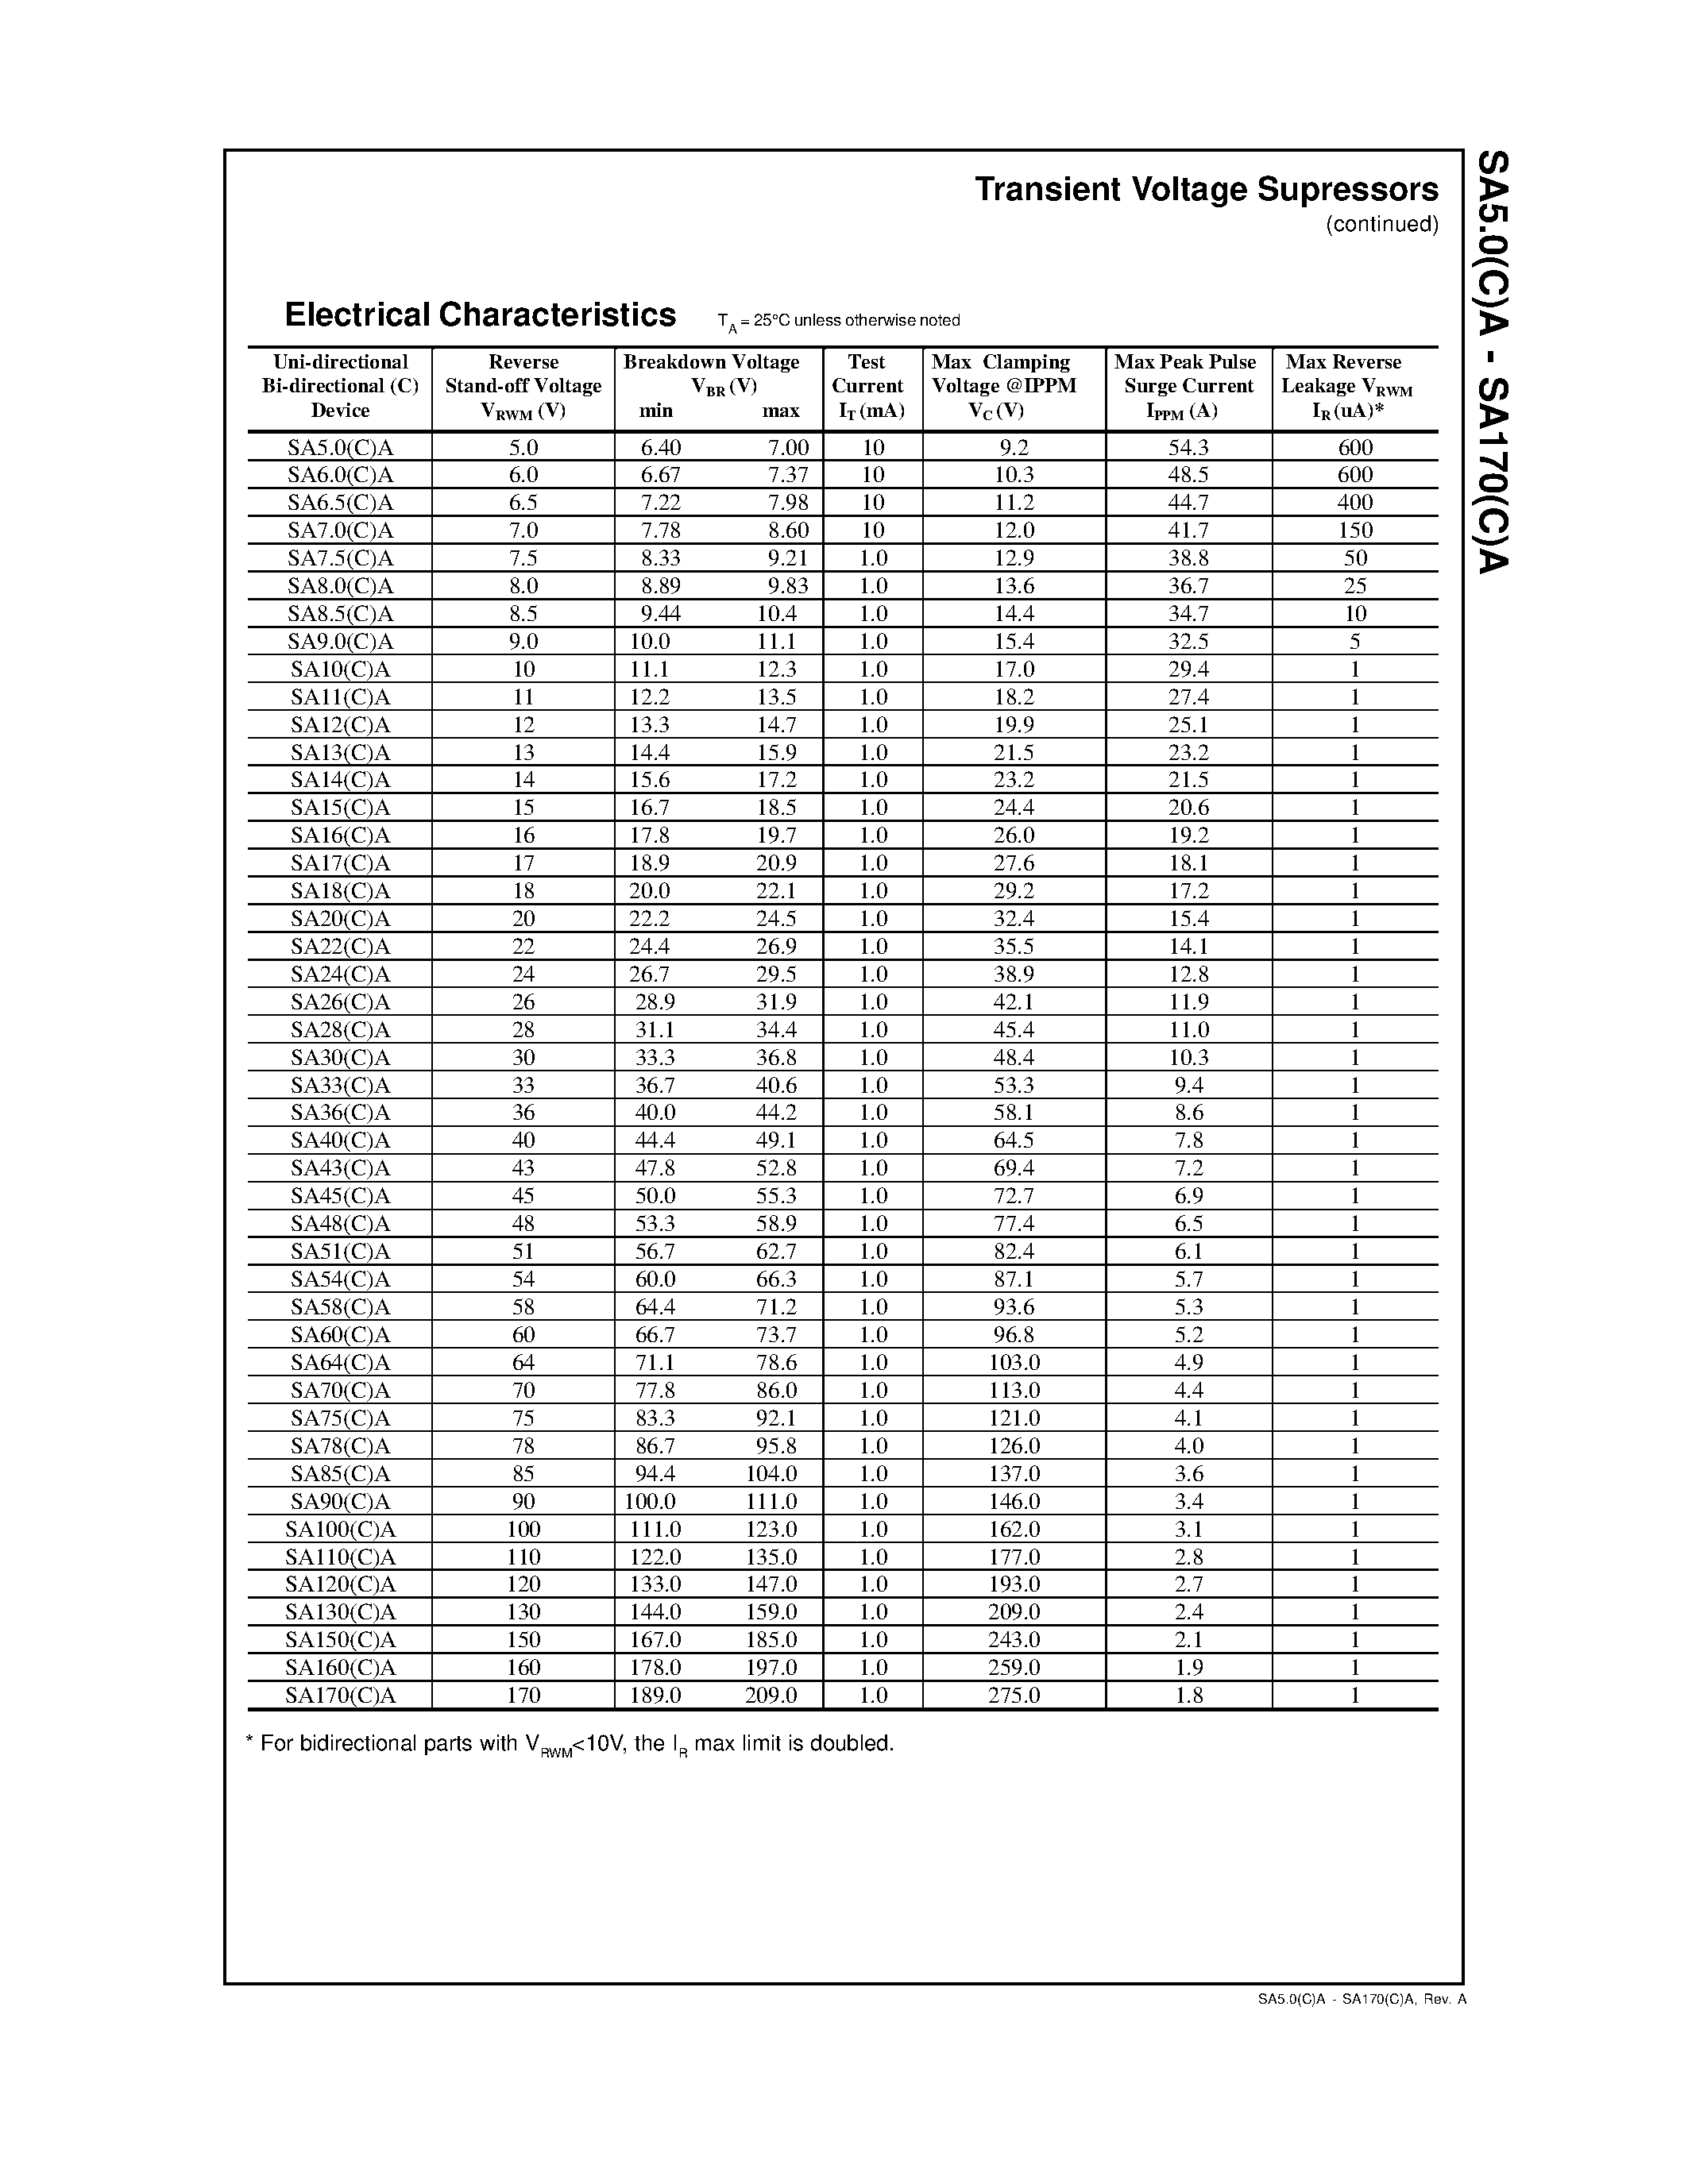 Datasheet SA26(C)A - DEVICES FOR BIPOLAR APPLICATIONS page 2